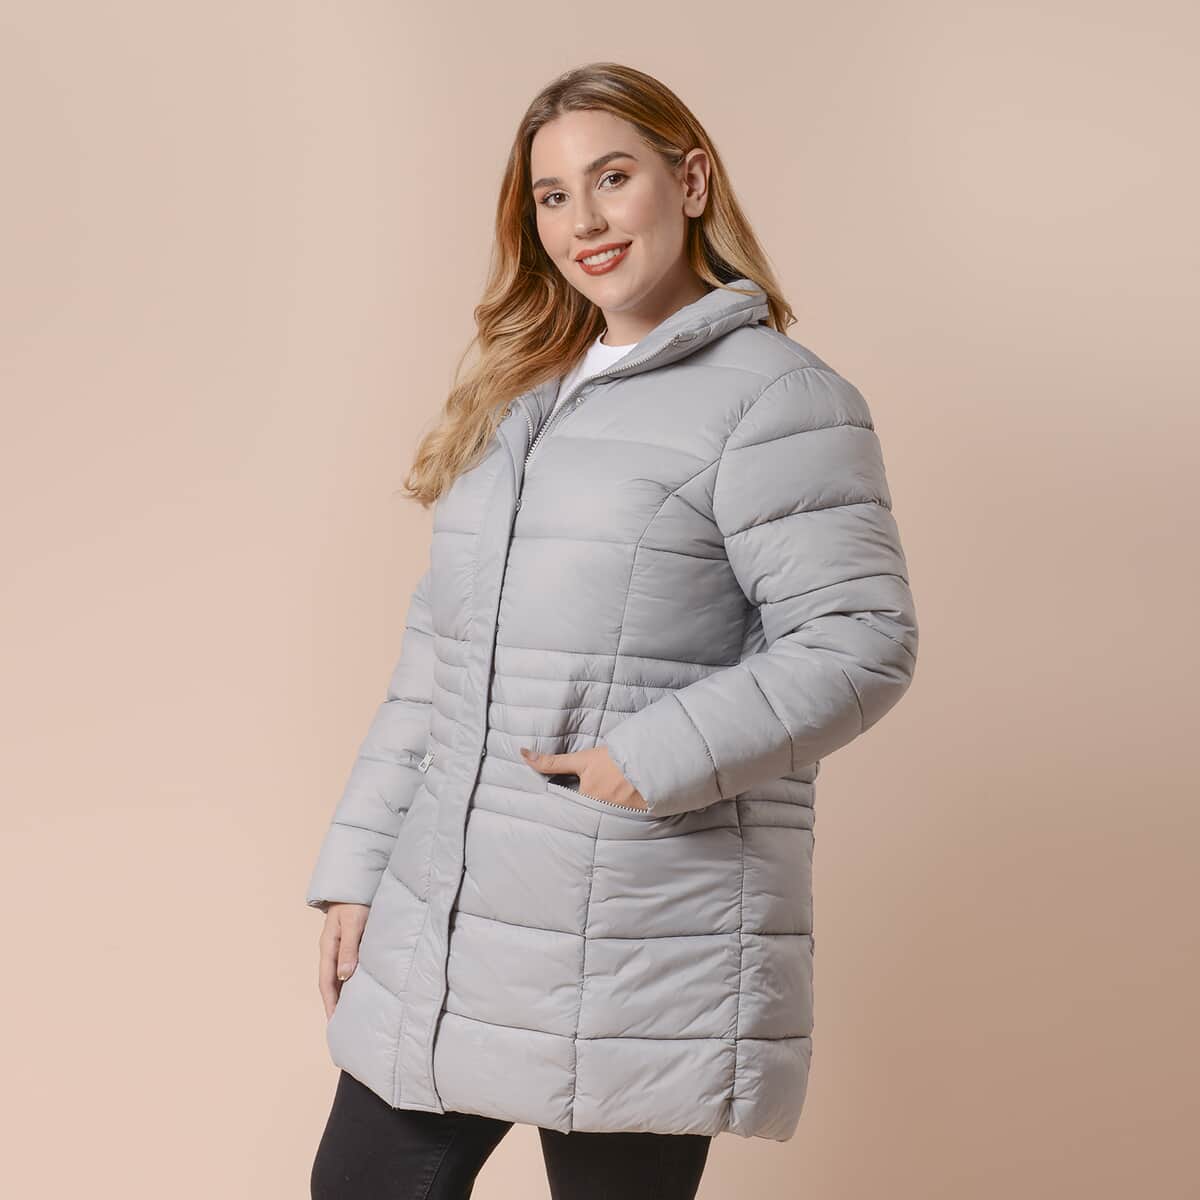 Passage Light Gray Long Sleeve Women Coat with 2 Zipper Pocket (XXL, Shell: 100% Nylon and Lining: 100% Polyester) image number 2